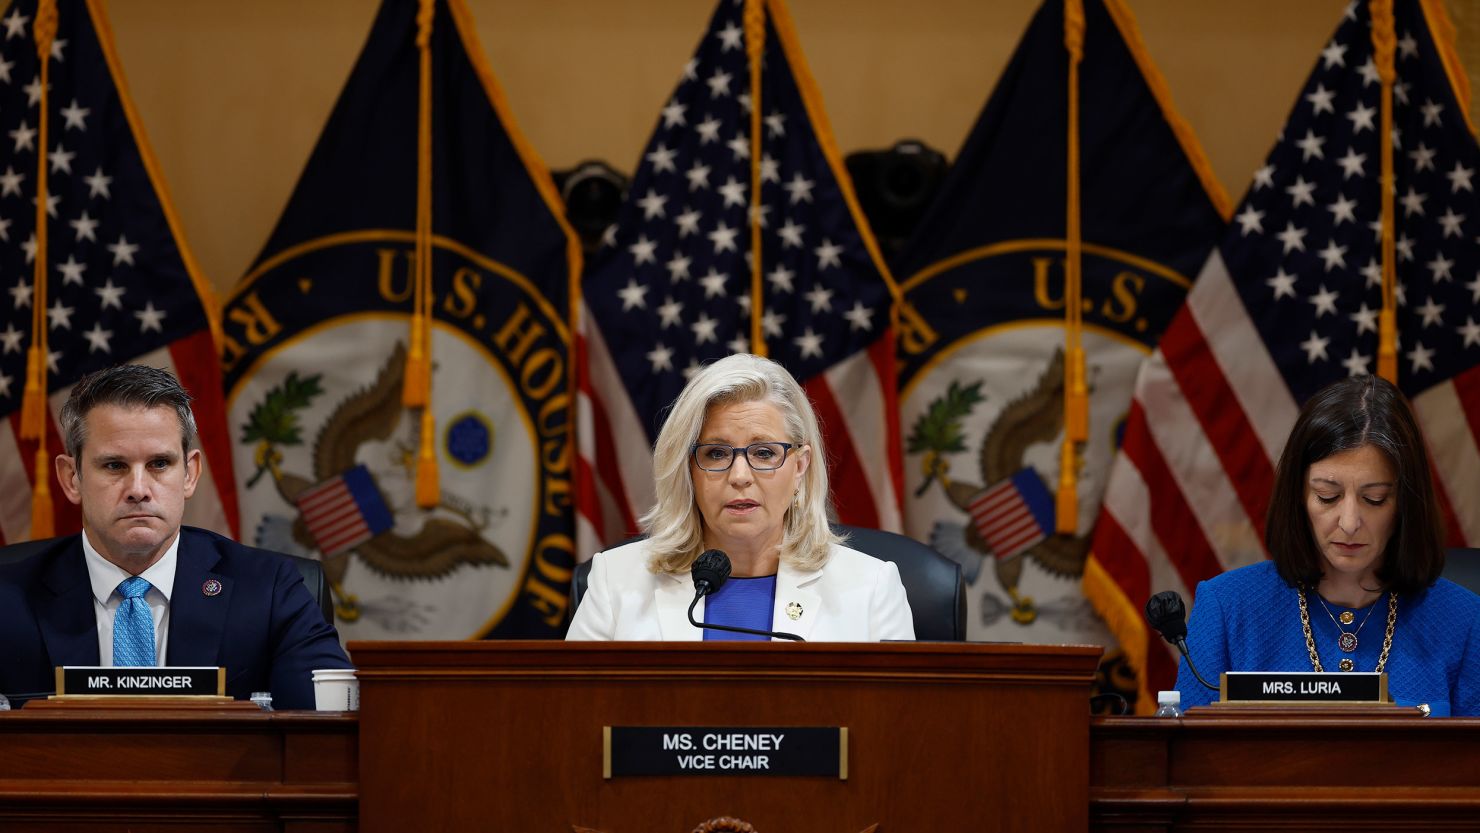 Rep. Liz Cheney presides over a hearing of the House Select Committee to Investigate the January 6 attack on the US Capitol with Rep. Adam Kinzinger and Rep. Elaine Luria on July 21, 2022 in Washington.